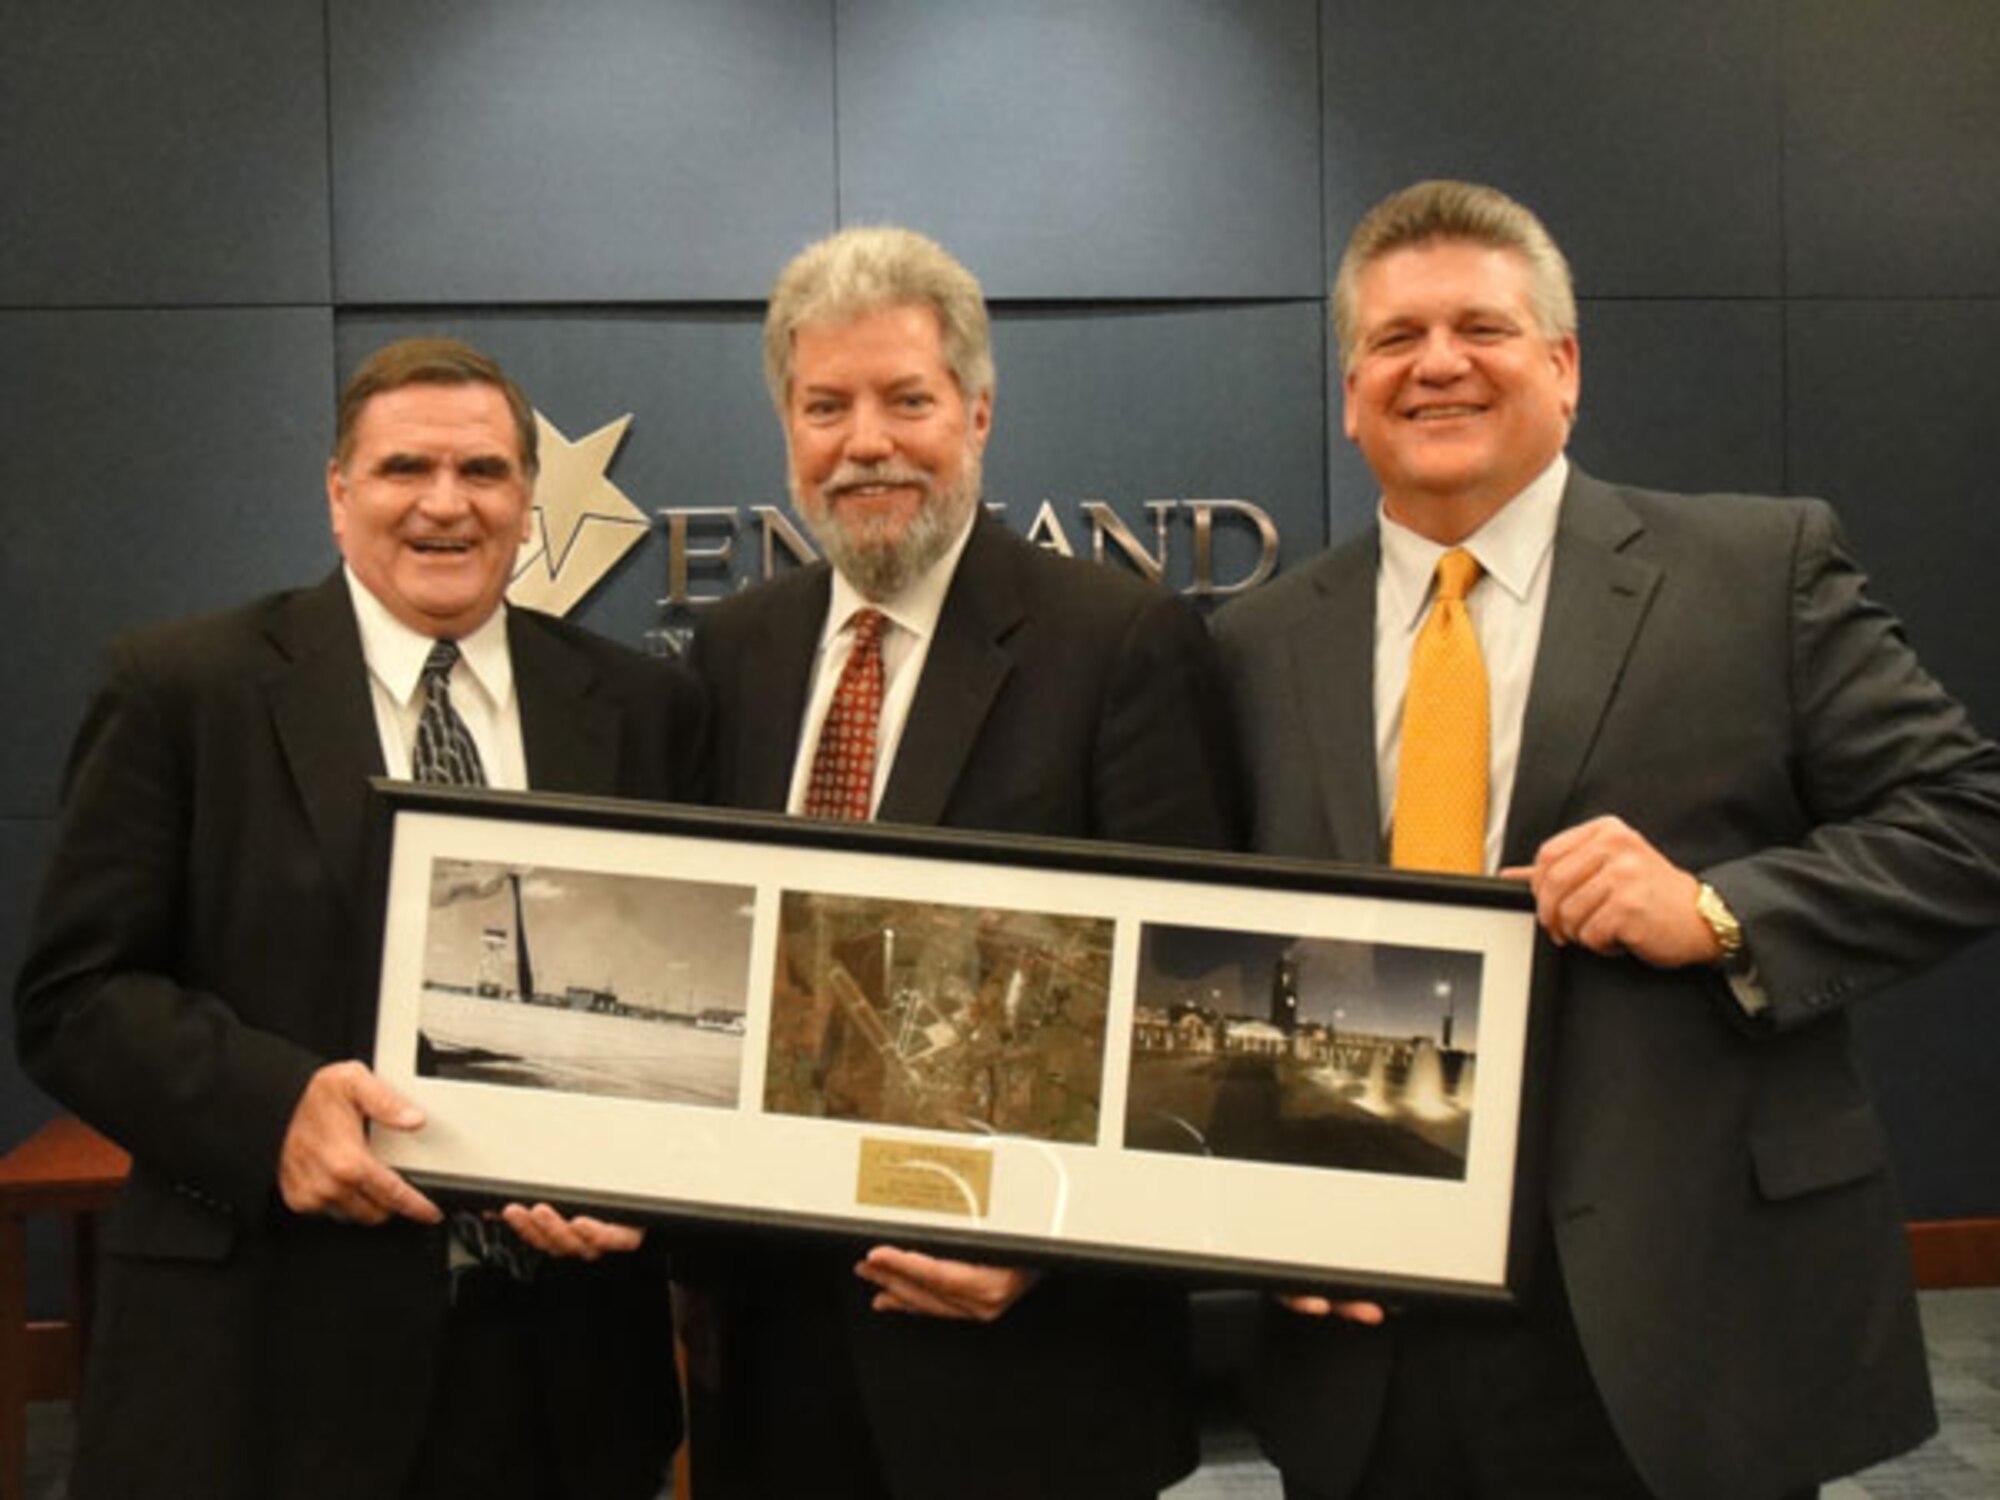 Air Force Real Property Agency Director Robert Moore presents a commemorative photo to Lance Harris, Chairman of the England Authority and Jon Grafton, Executive Director of the England Authority during the Whole Base Transfer Ceremony on December 8, 2011.